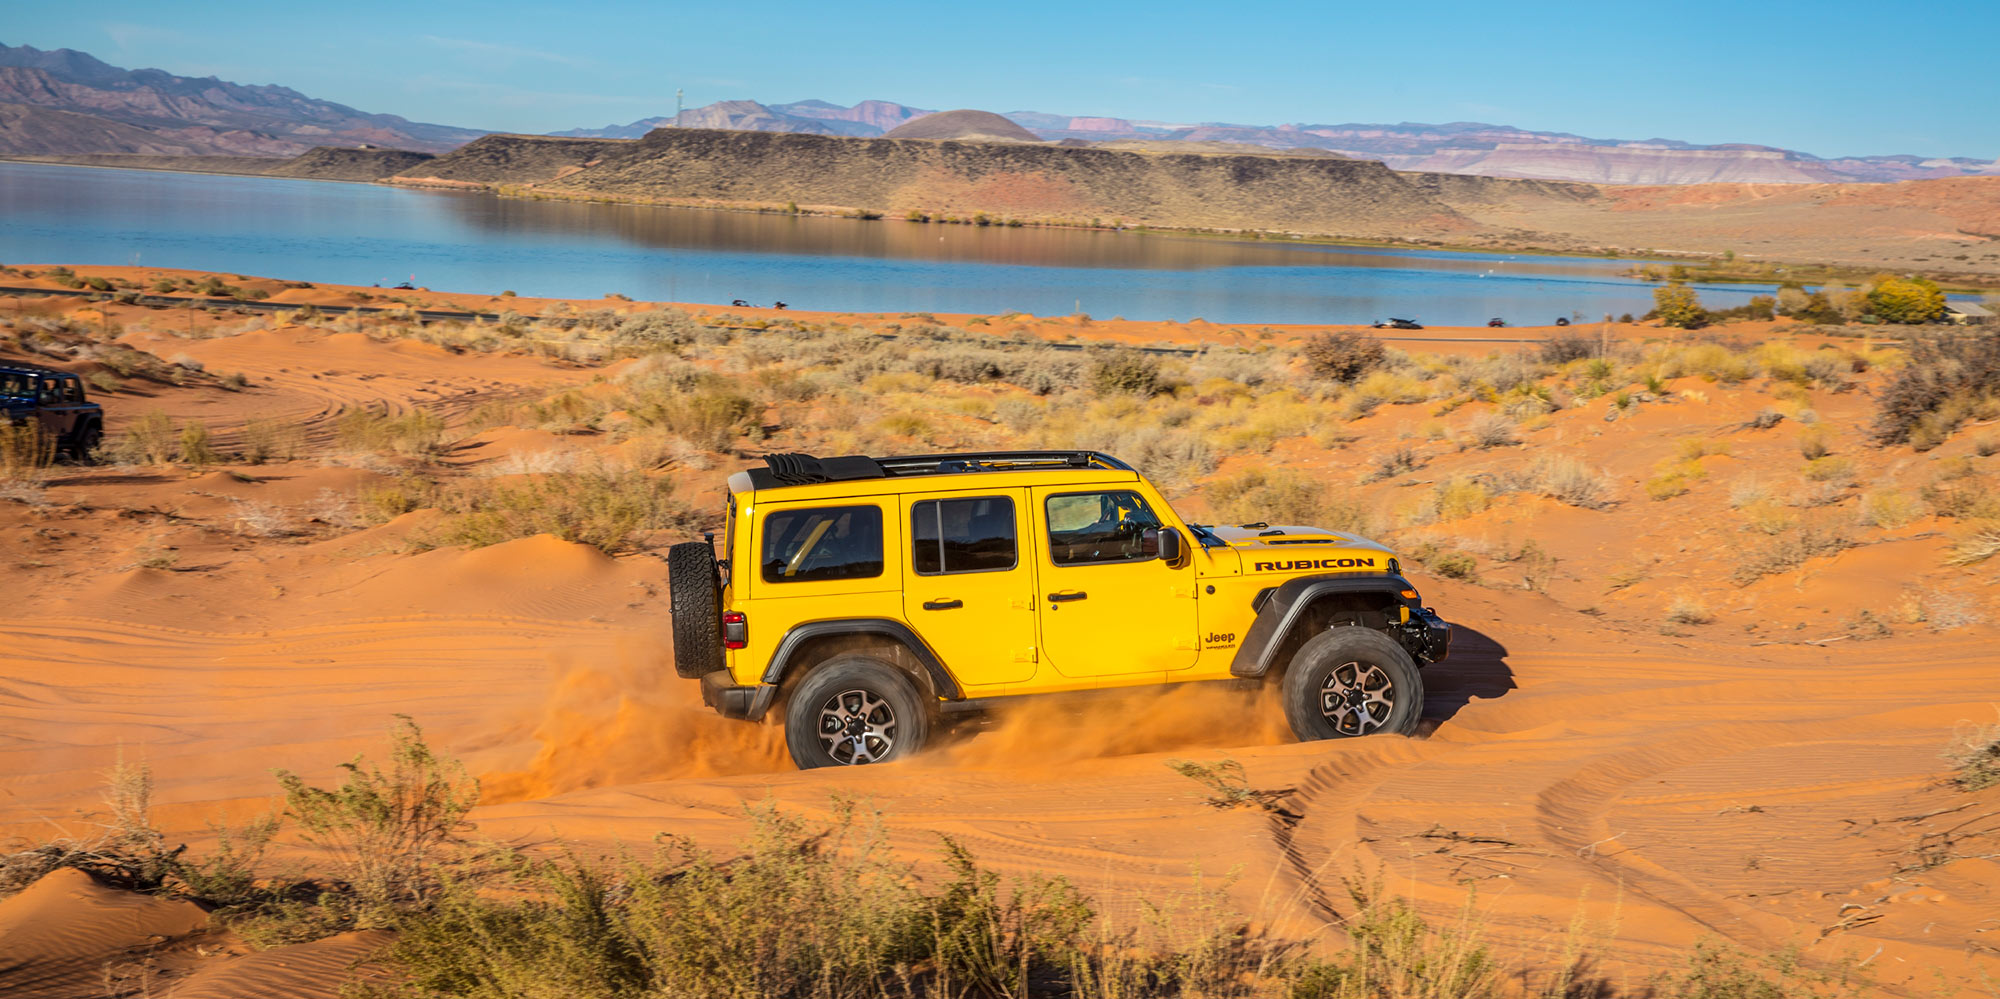 Jeep president says Wrangler EV will go 0-60 in 6 seconds, beating  combustion models | Electrek